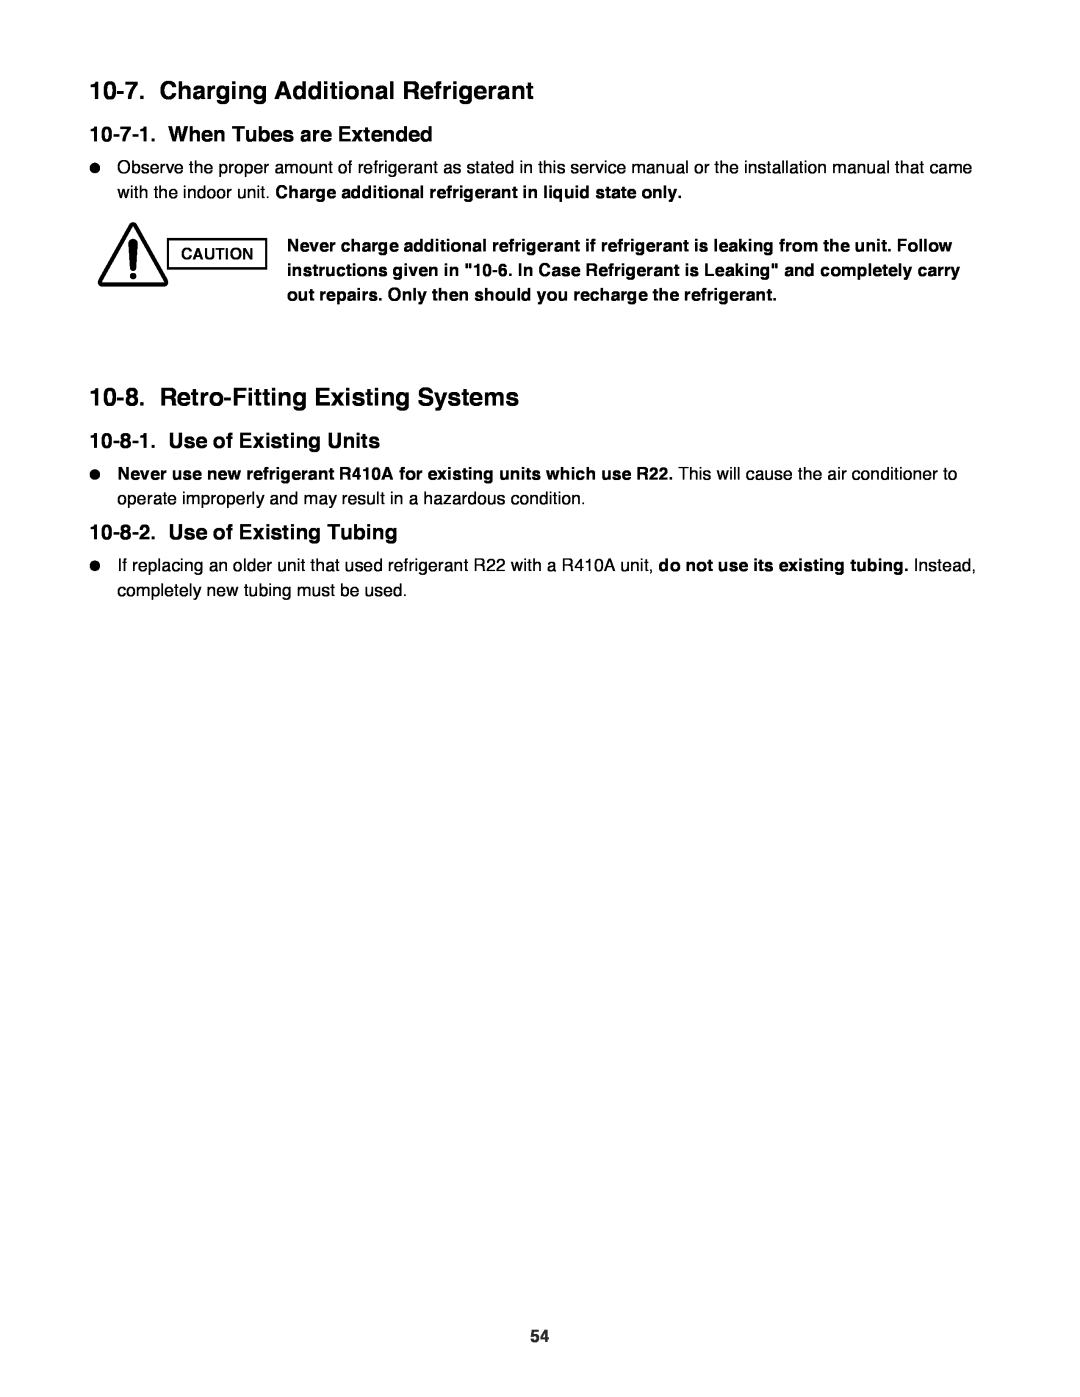 Sanyo C3682, C3082 service manual Charging Additional Refrigerant, Retro-Fitting Existing Systems, When Tubes are Extended 